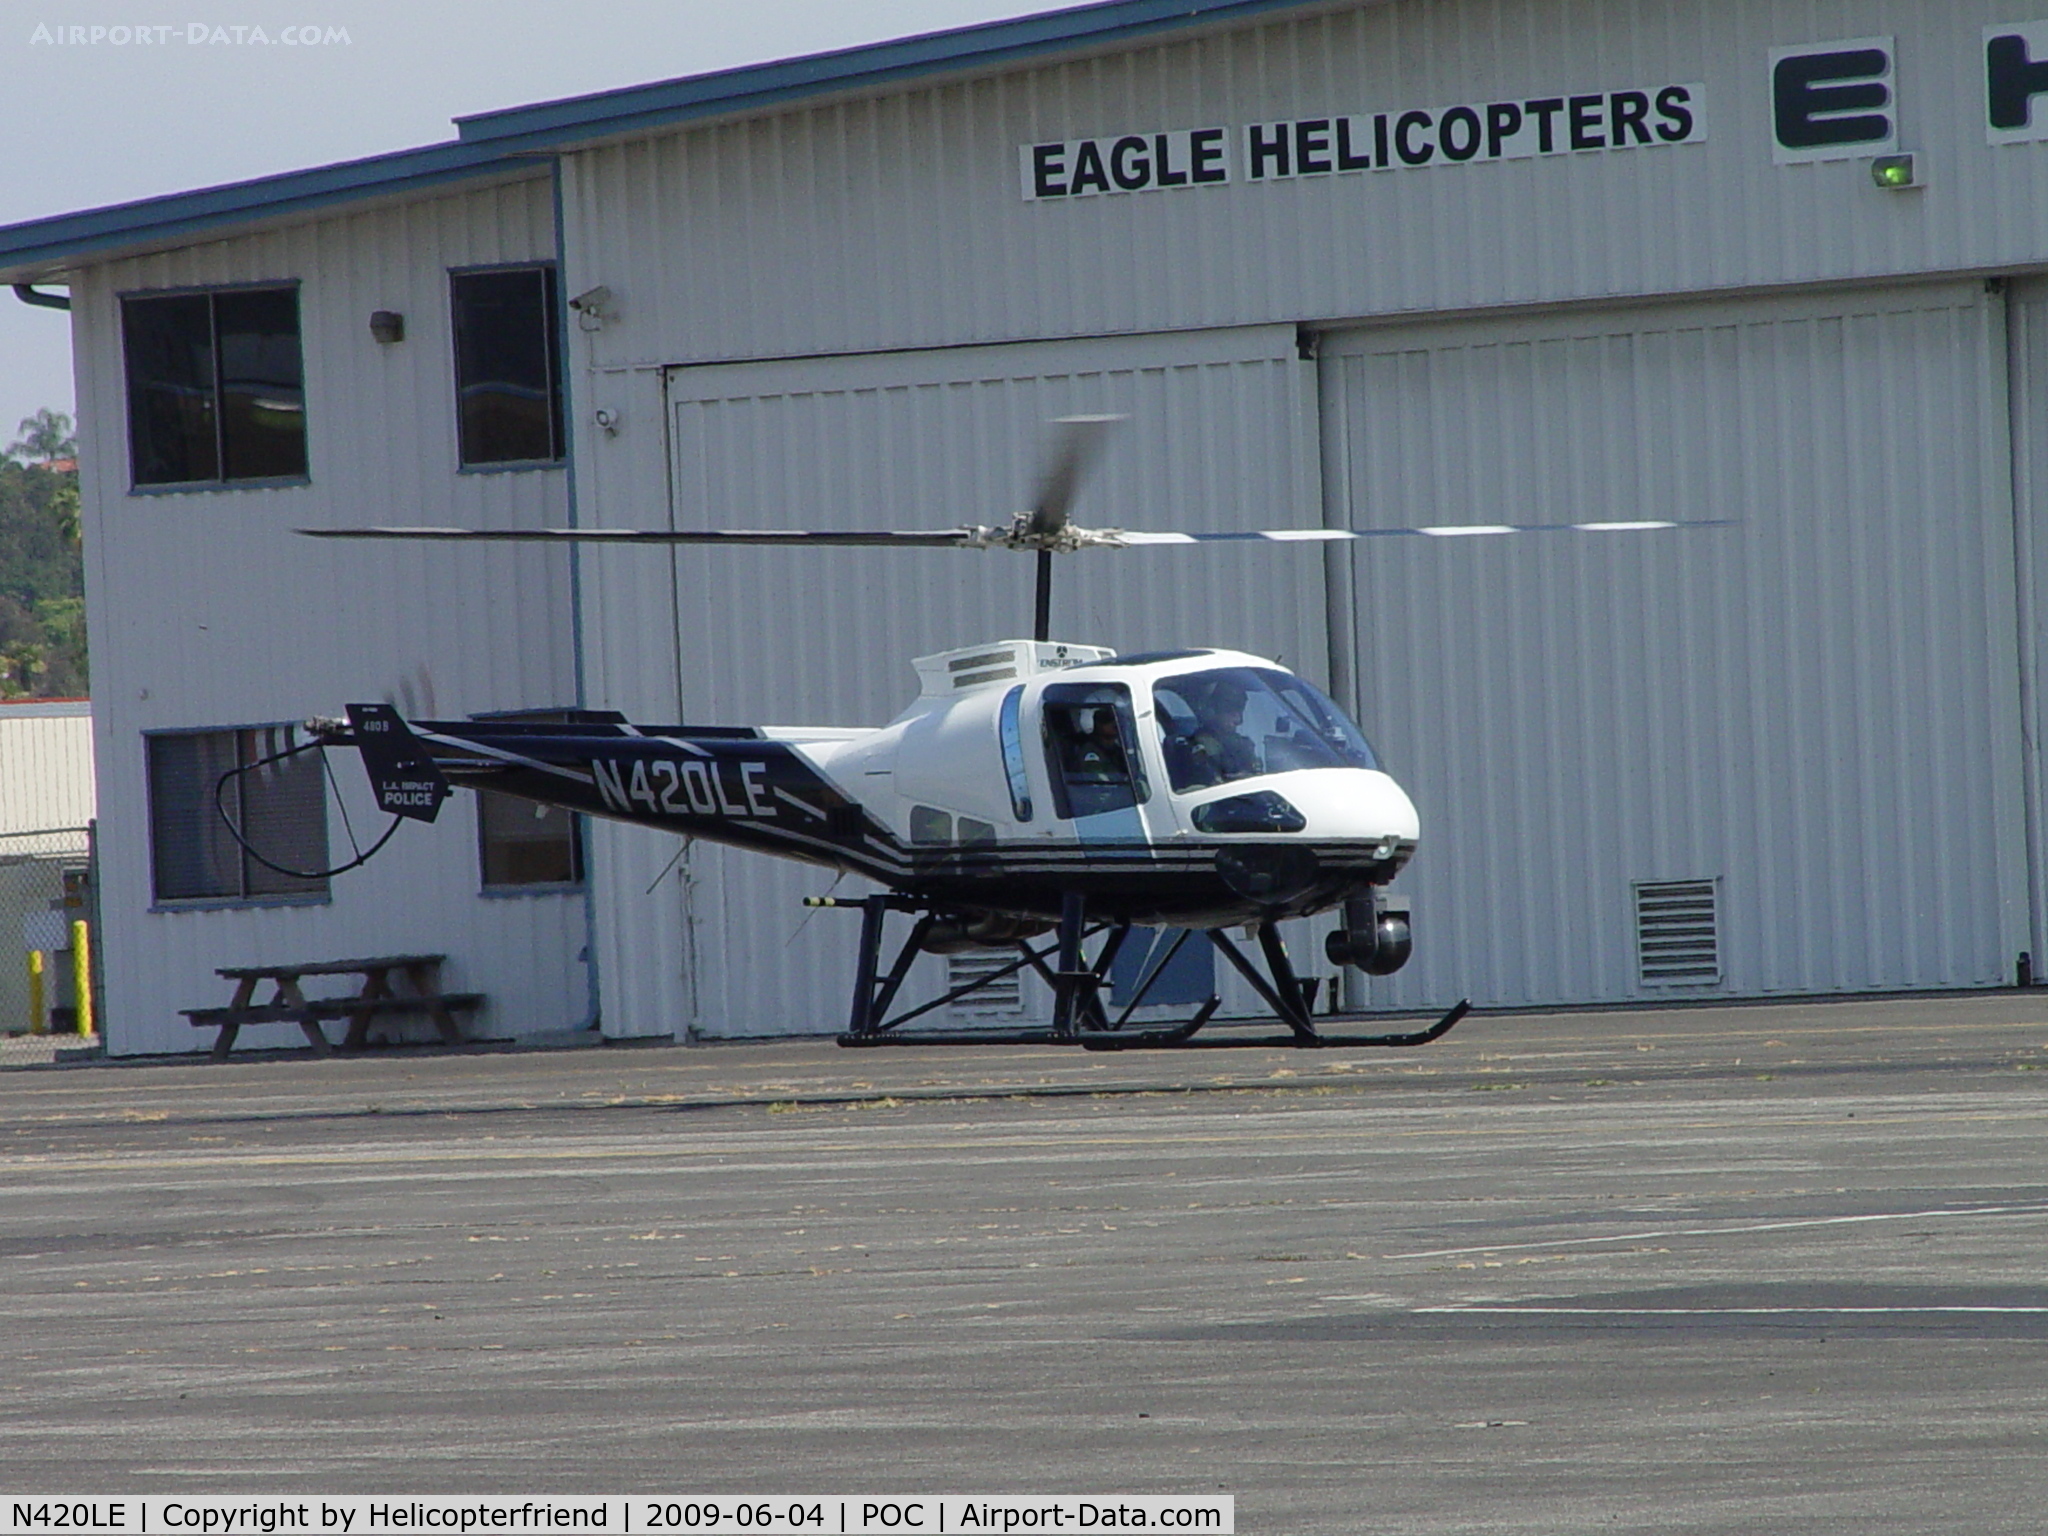 N420LE, 2006 Enstrom 480B C/N 5101, Parking at Eagle Helicopter to get fueled up